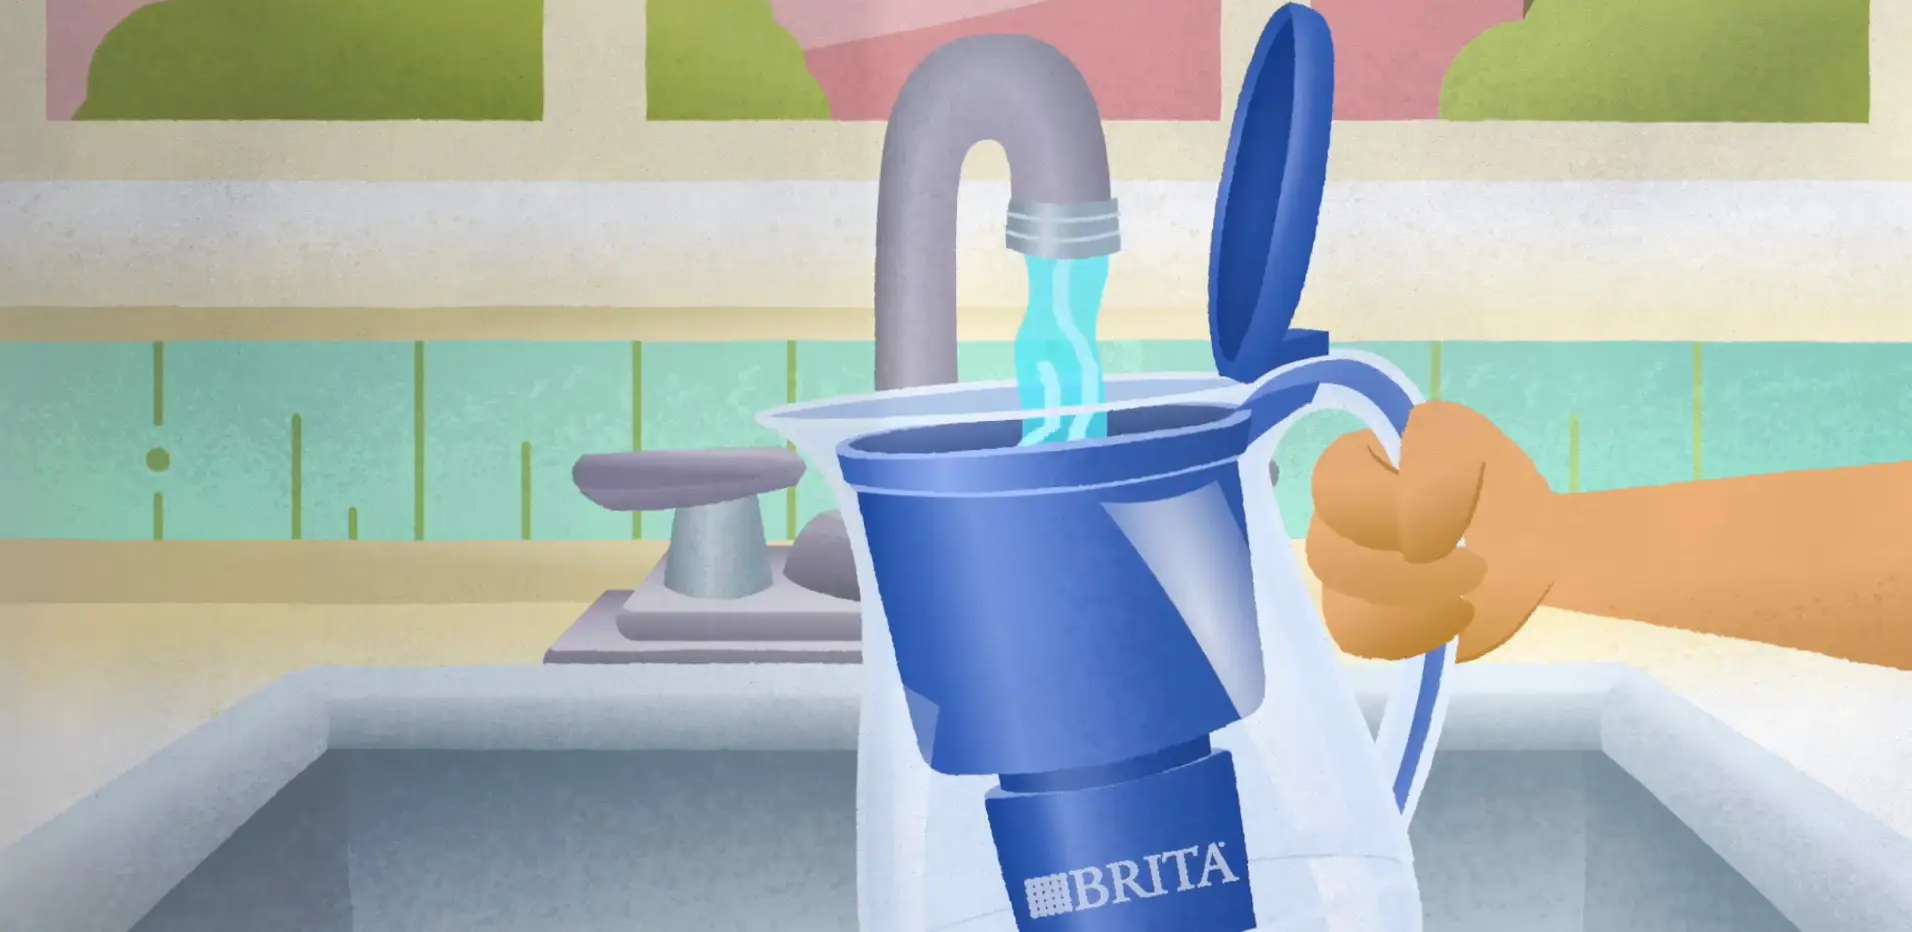 A person fills a Brita water filter pitcher from a kitchen faucet, with colorful kitchen tiles in the background, captured for the Sales Content Library.